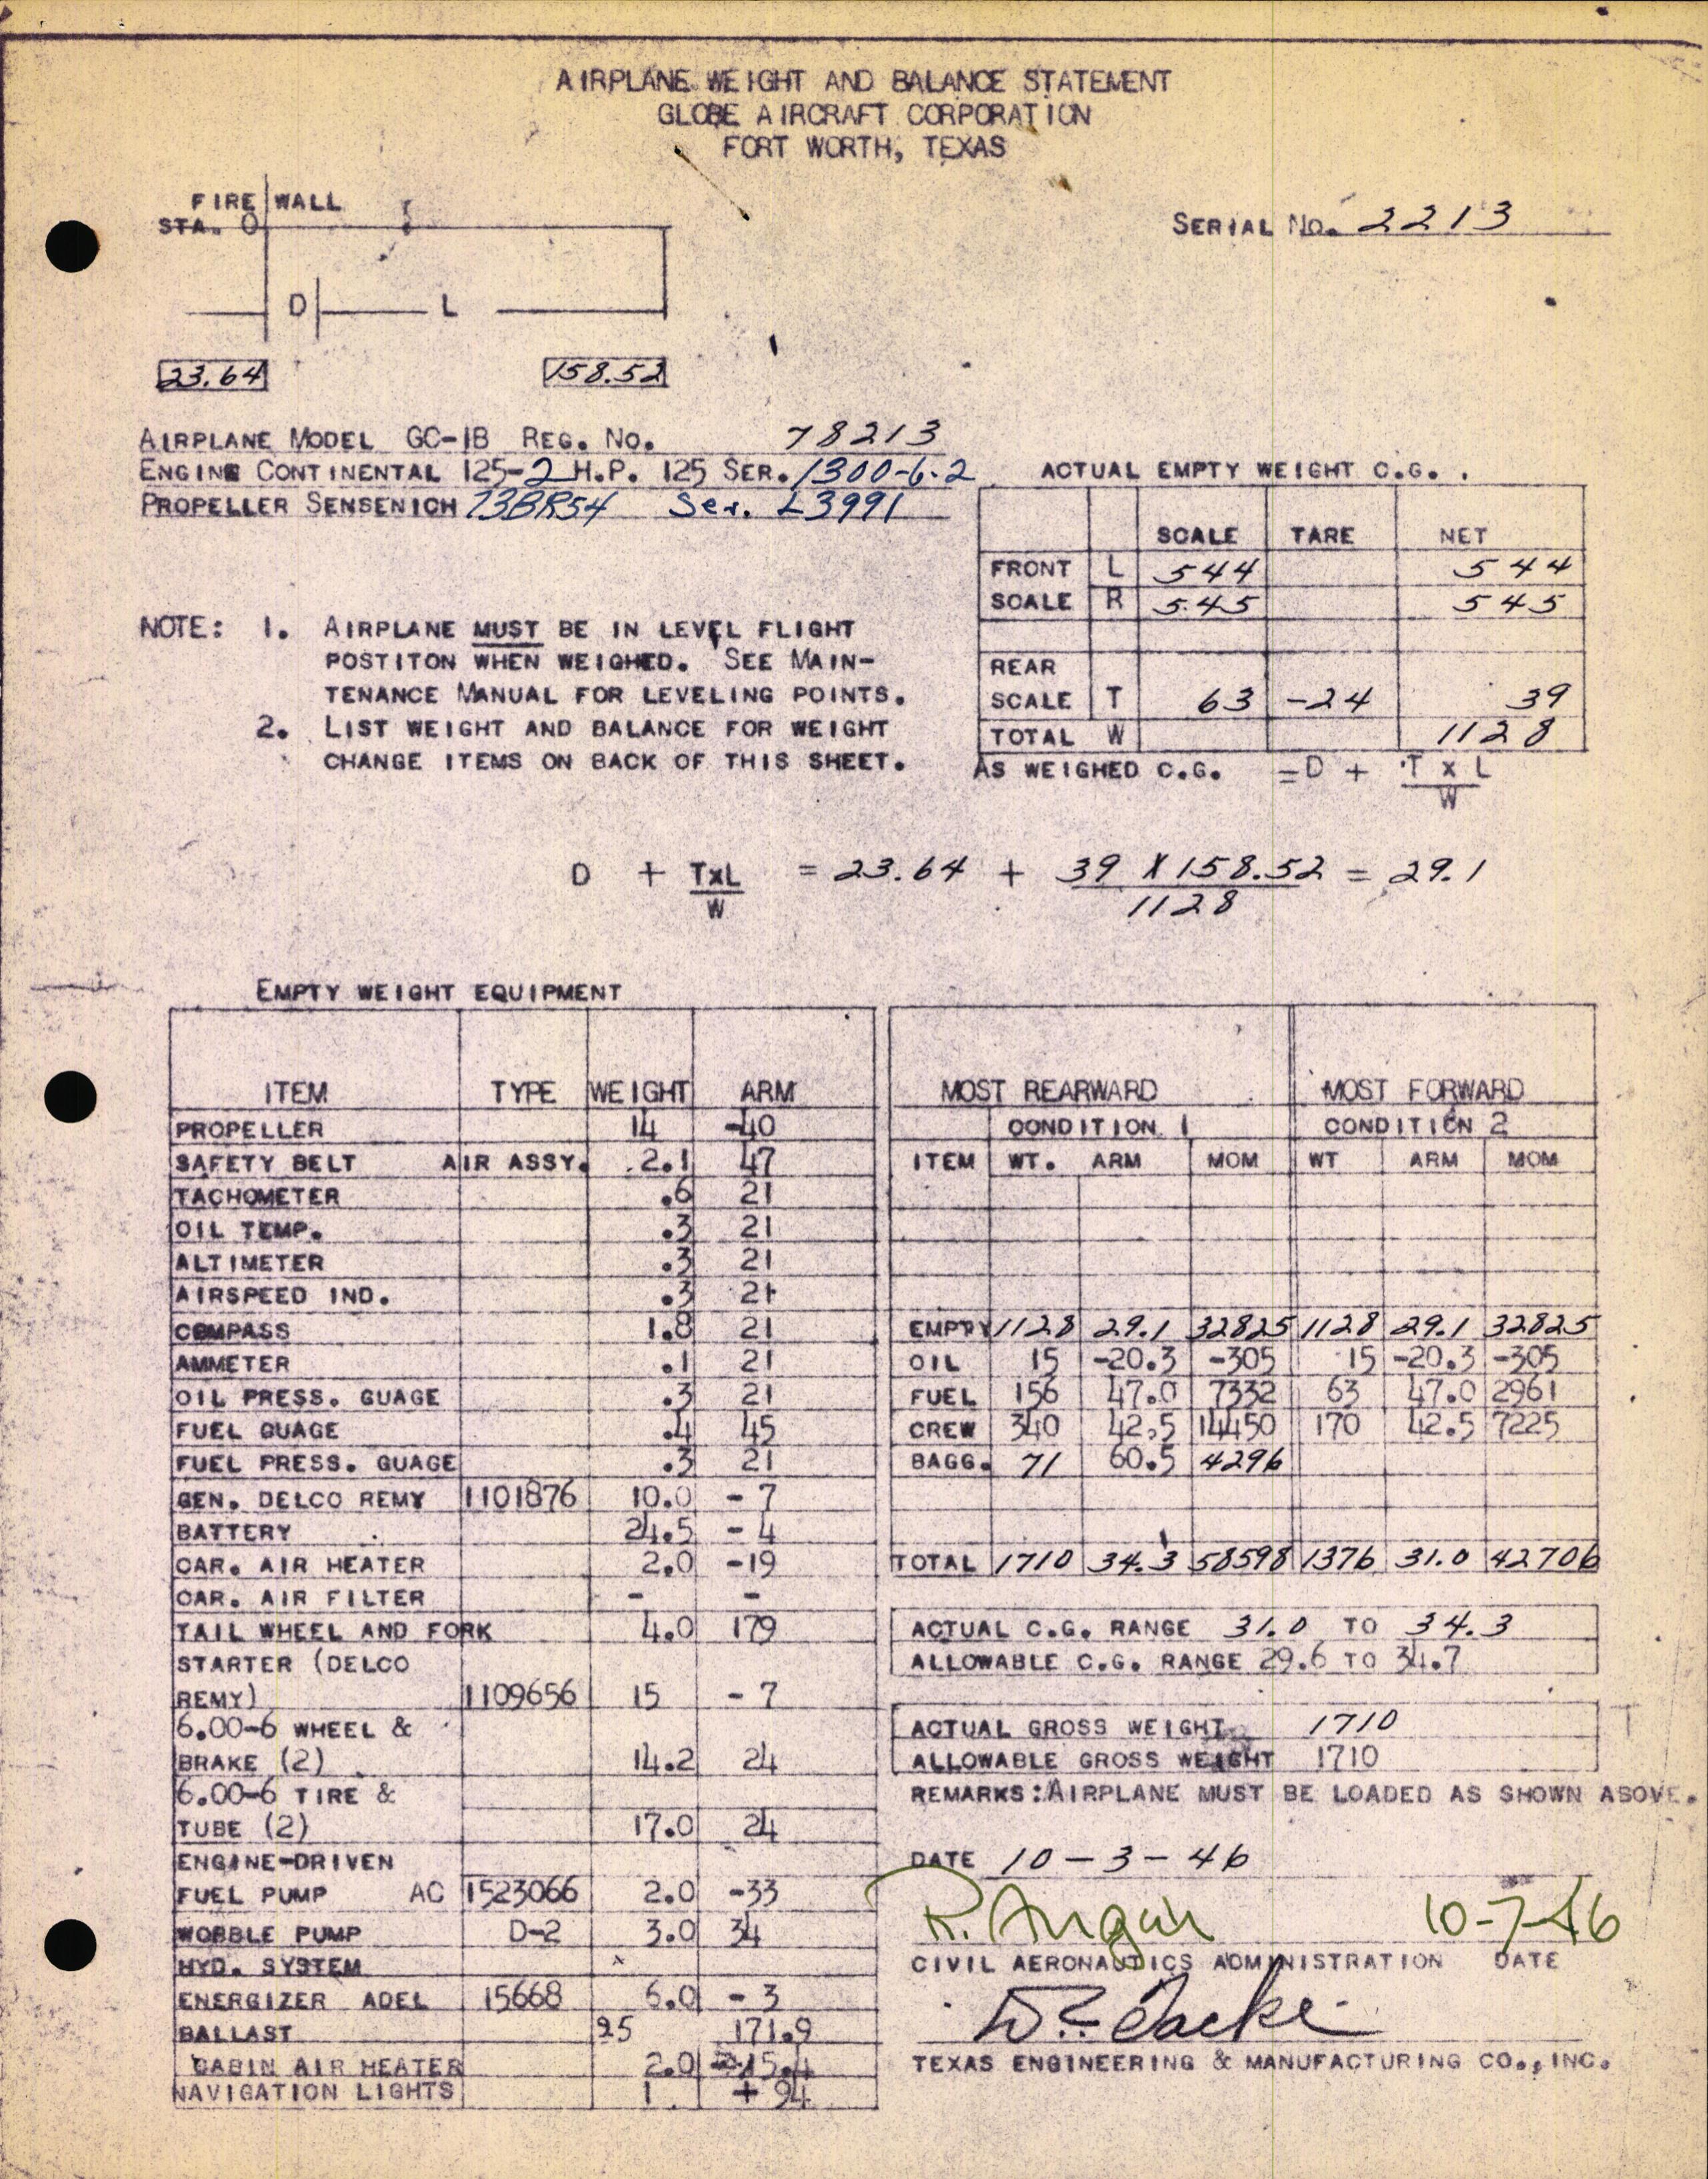 Sample page 1 from AirCorps Library document: Technical Information for Serial Number 2213